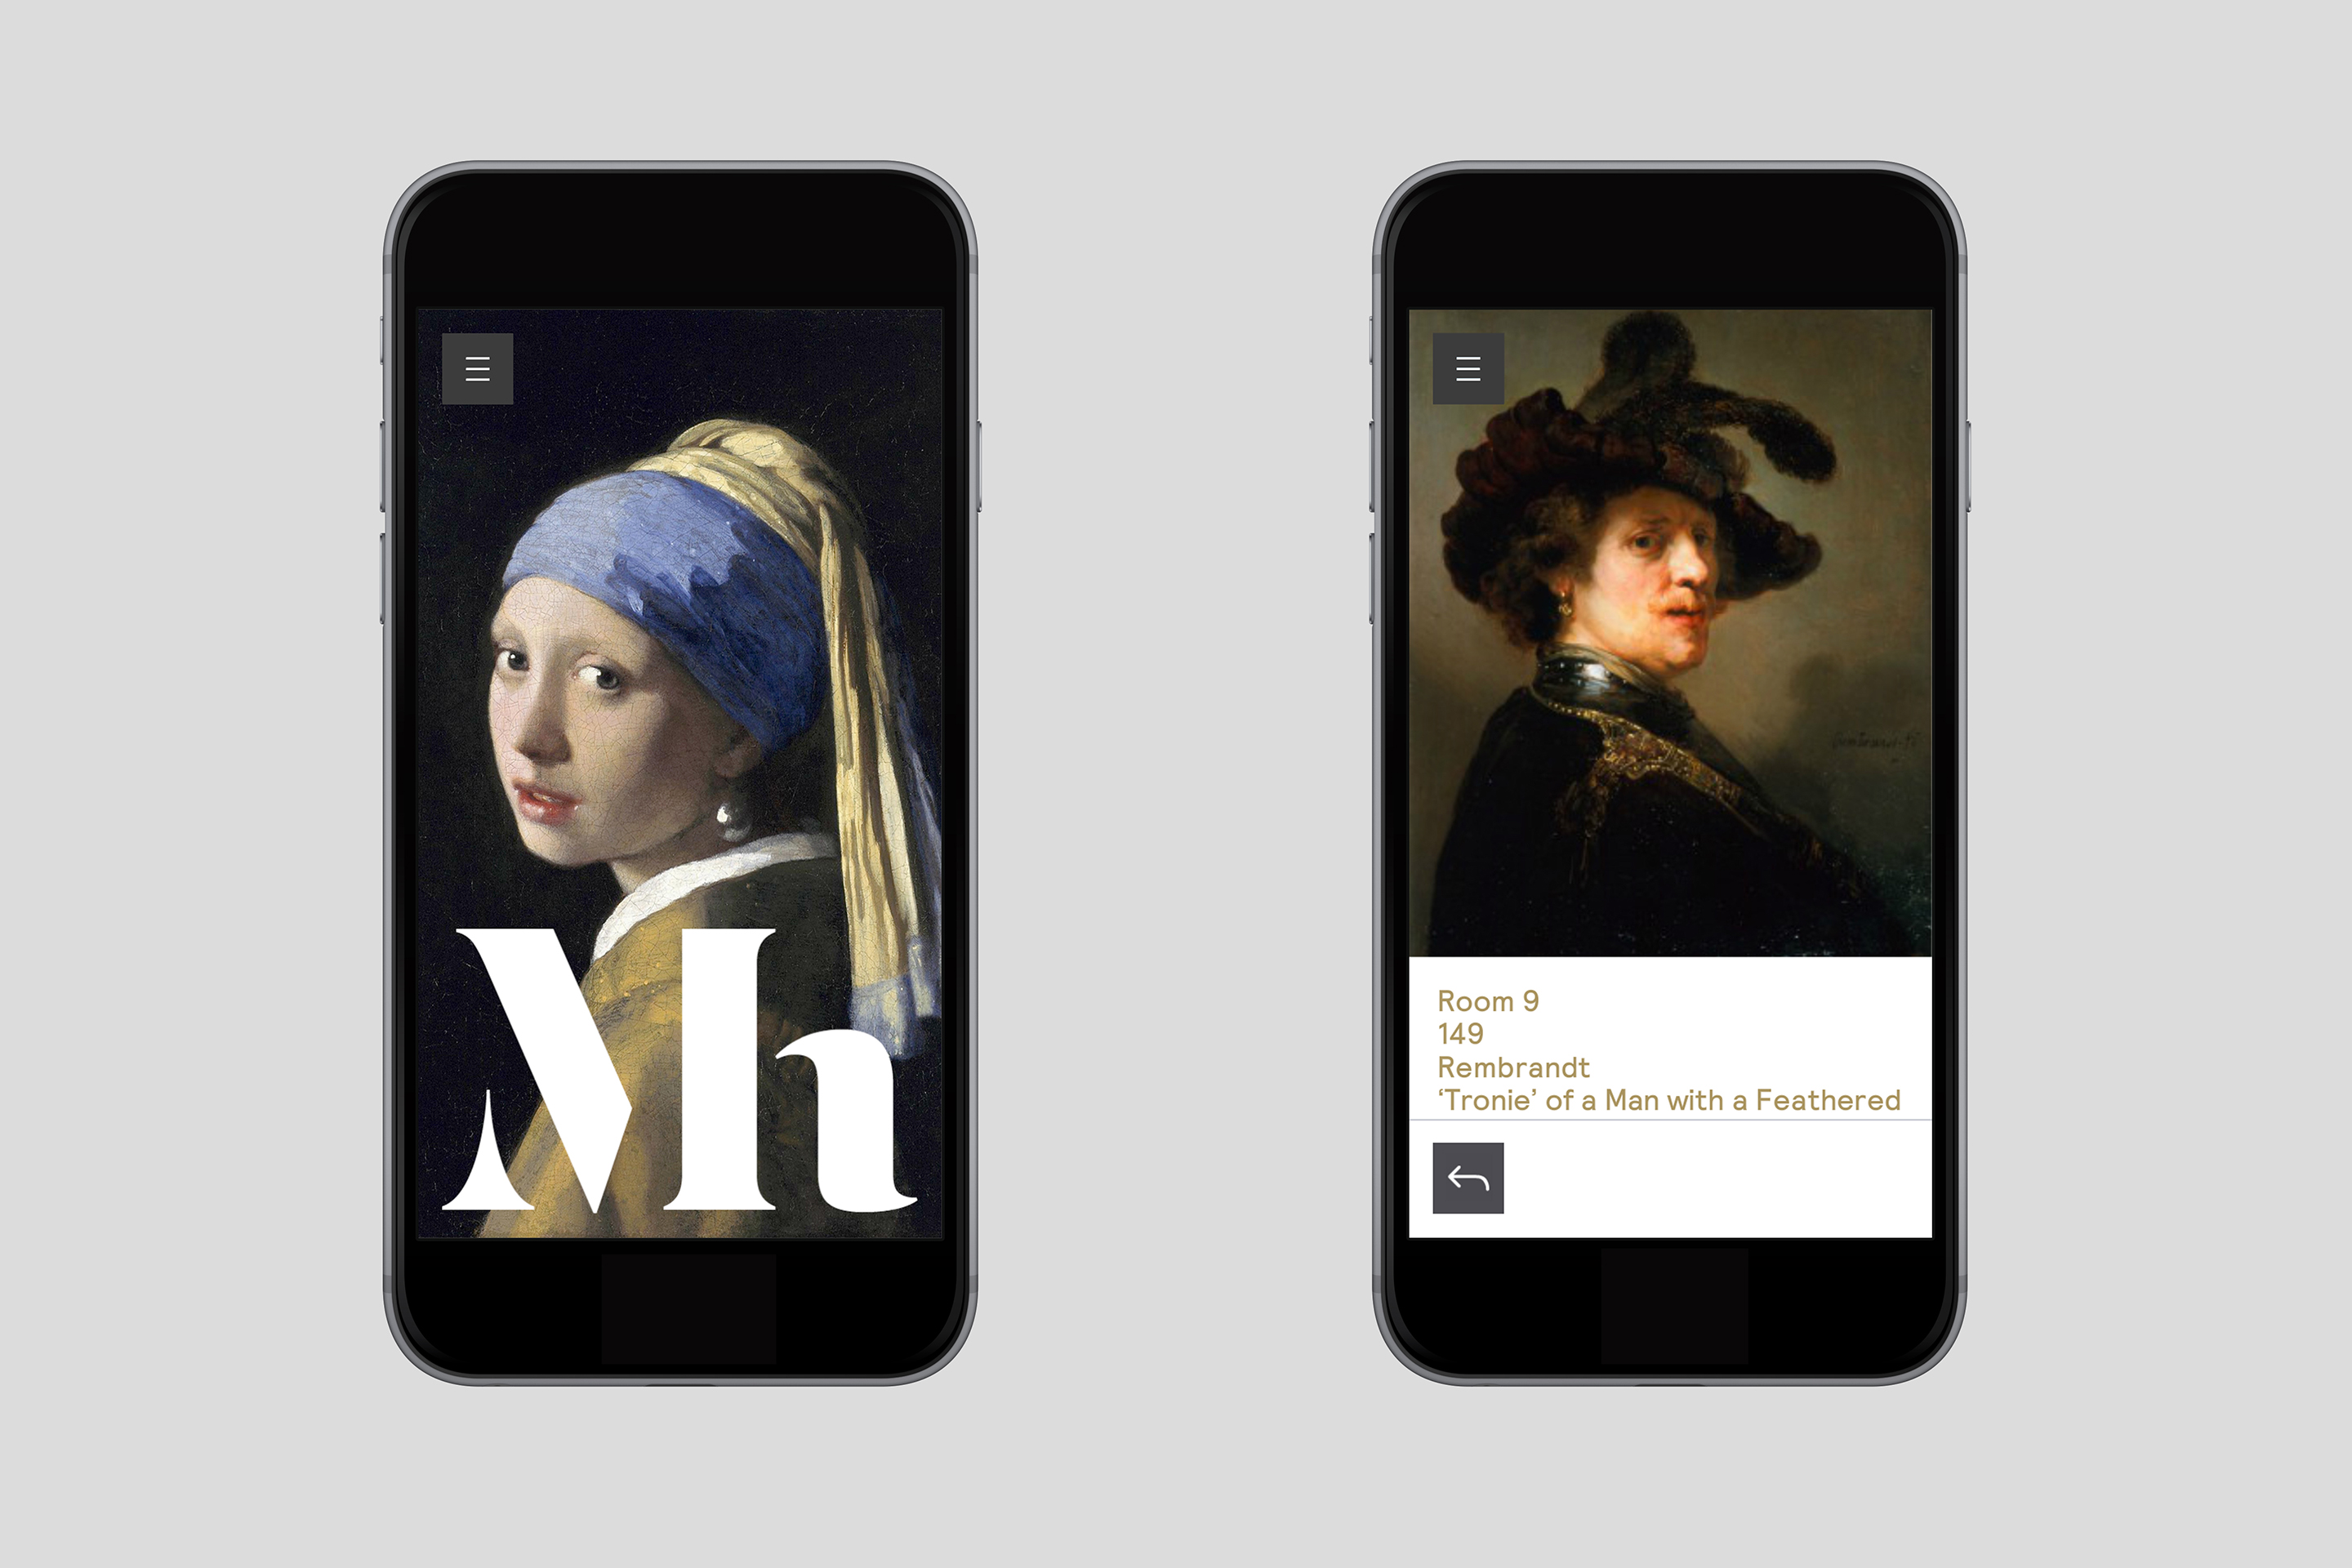 Responsive website and brand identity designed by Dumbar for Mauritshuis